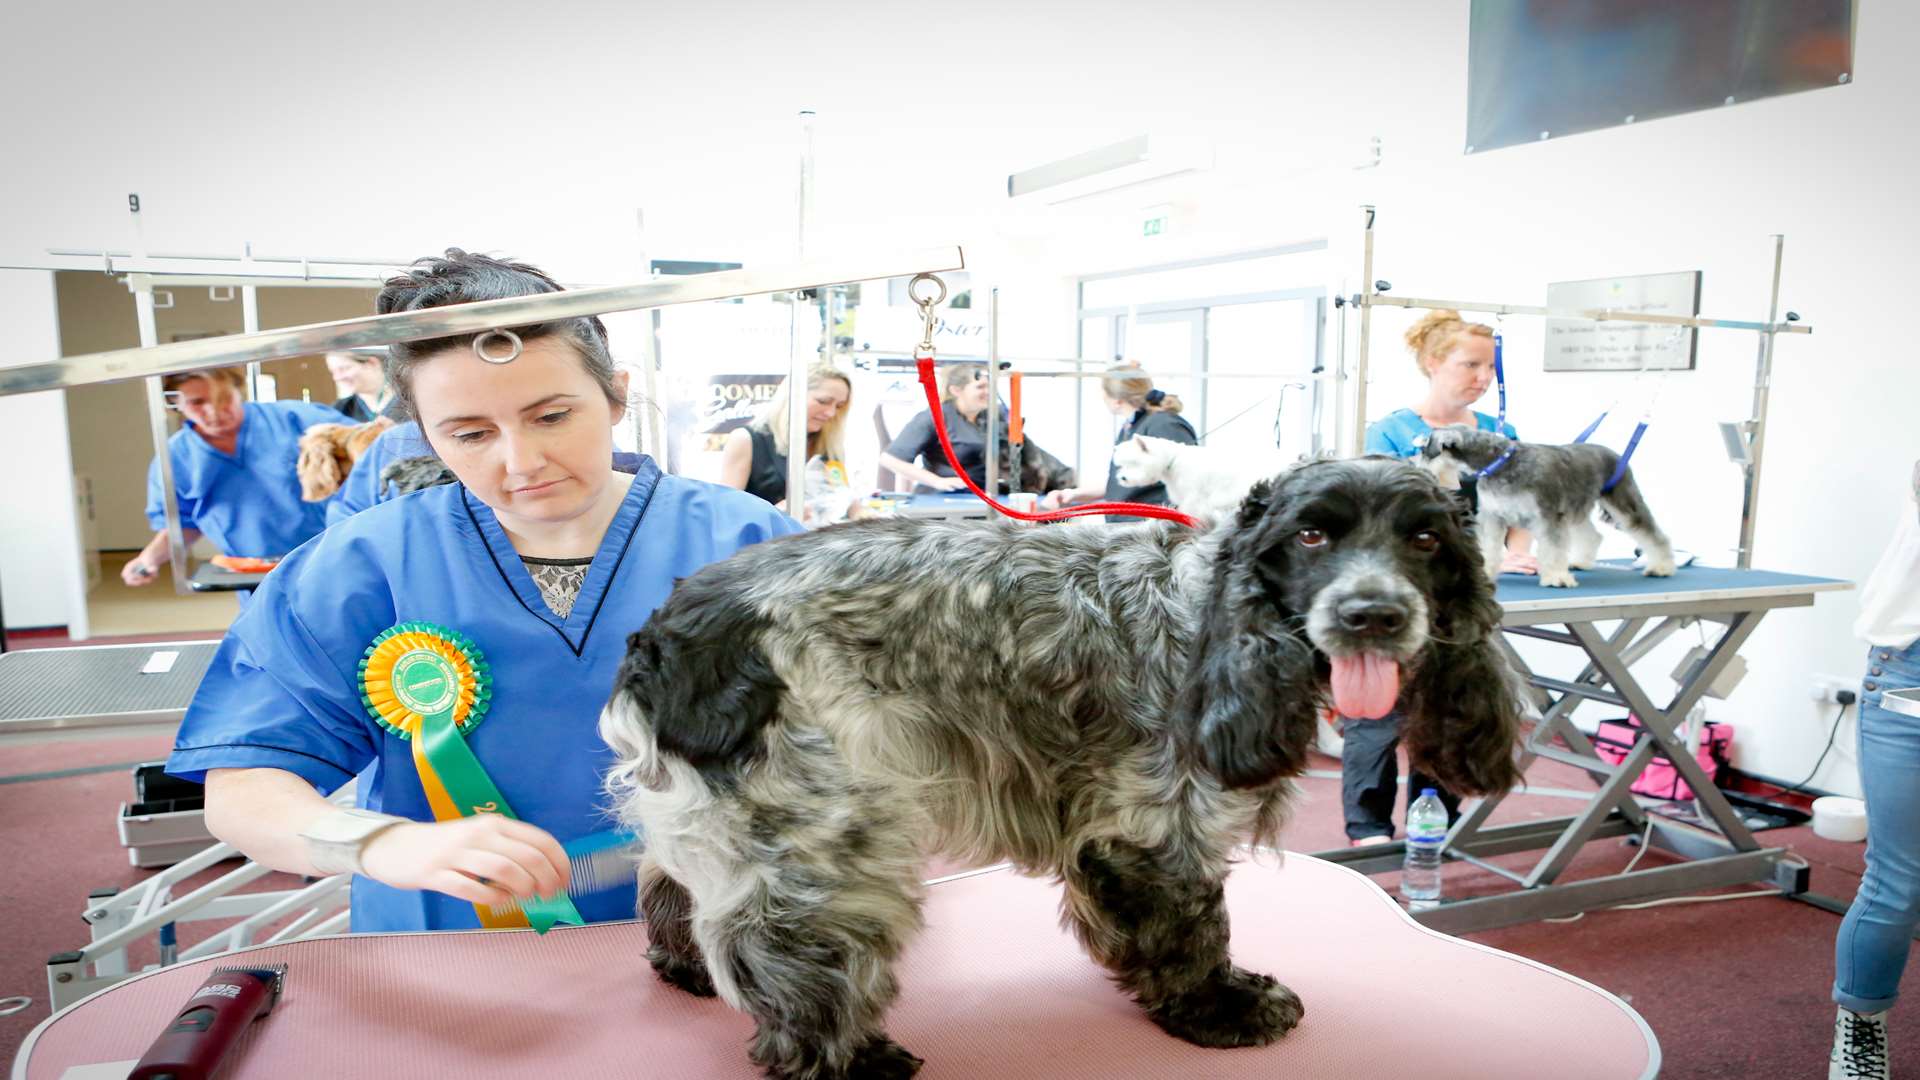 Dog grooming course proves so popular Hadlow College needs